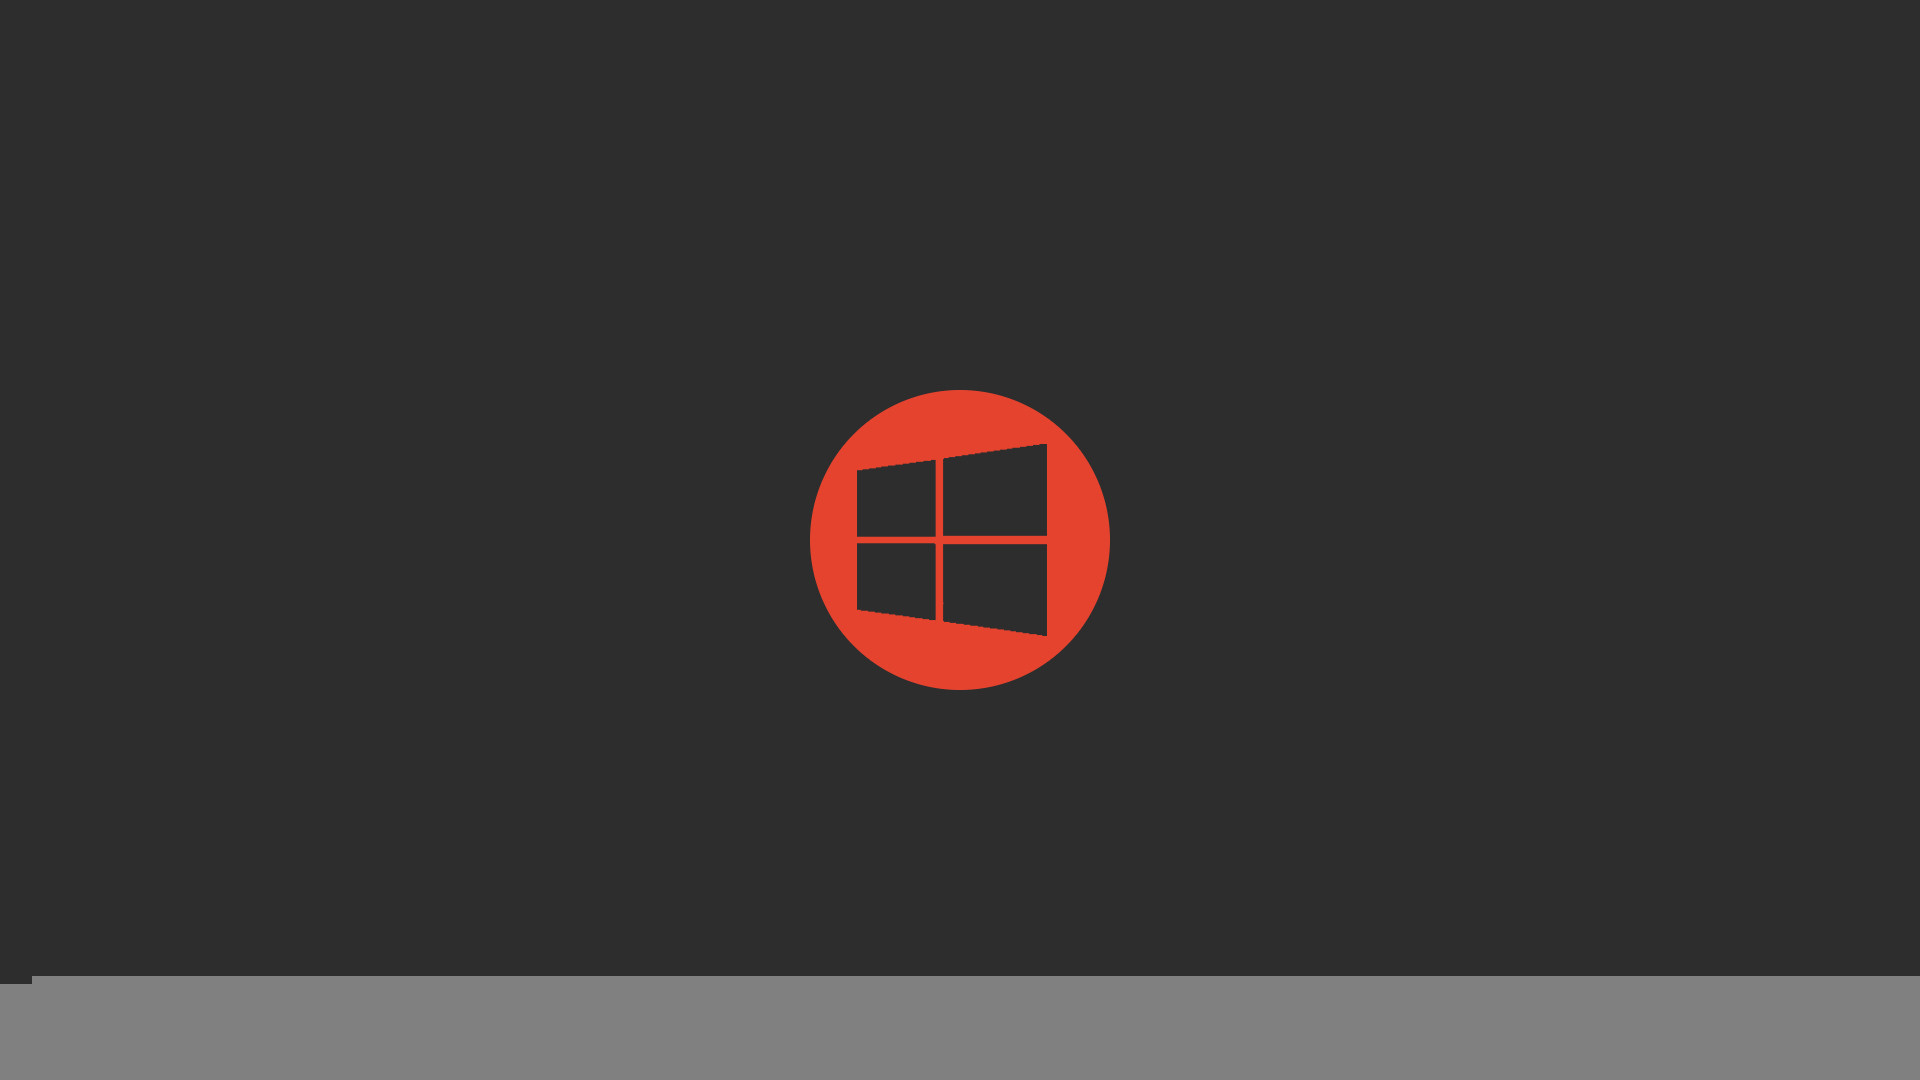 1920x1080 Iphone Images of Microsoft Windows 10 Logo by Narciso Grover